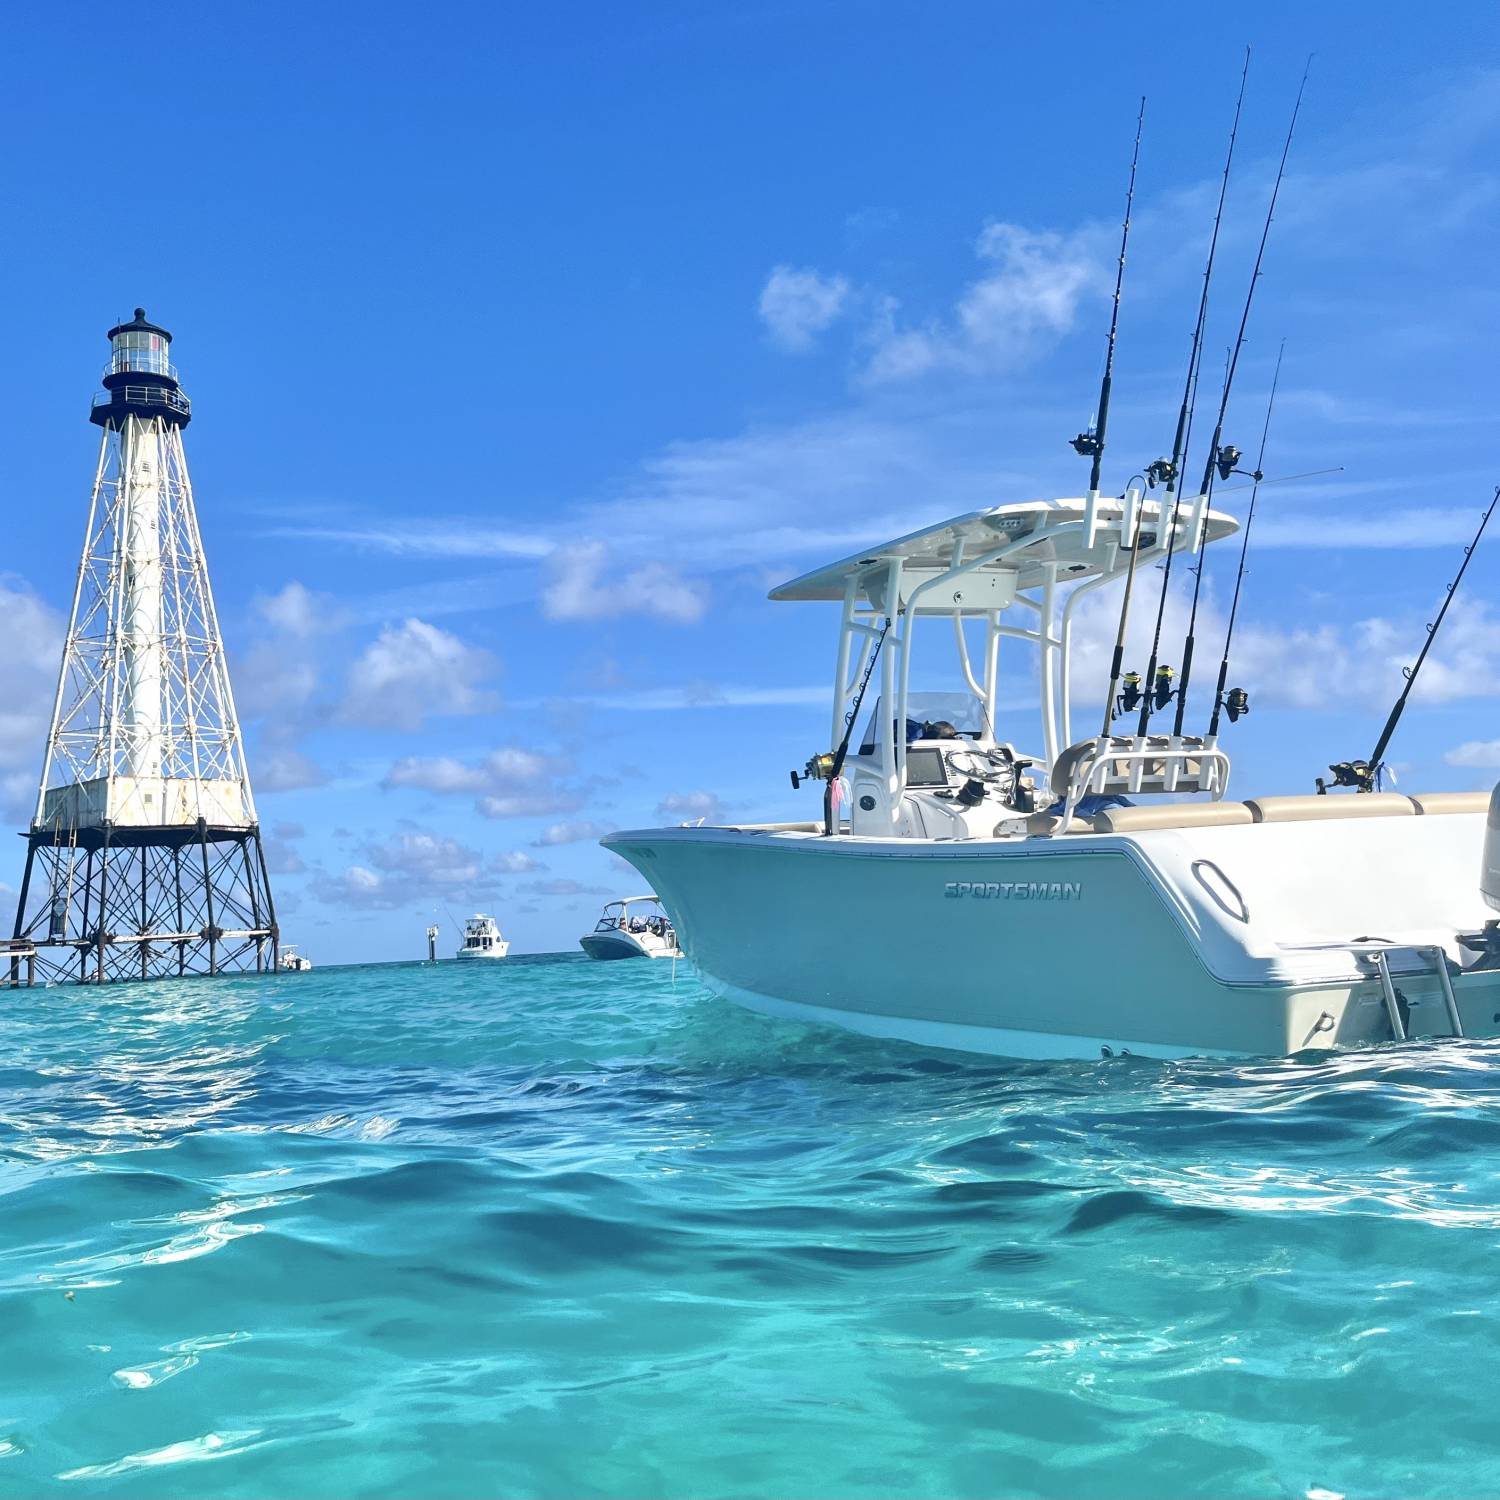 After catching wahoo in Islamorada on our 231 Heritage Sportsman we anchored up at Alligator Reef Lighthouse to enjoy some...